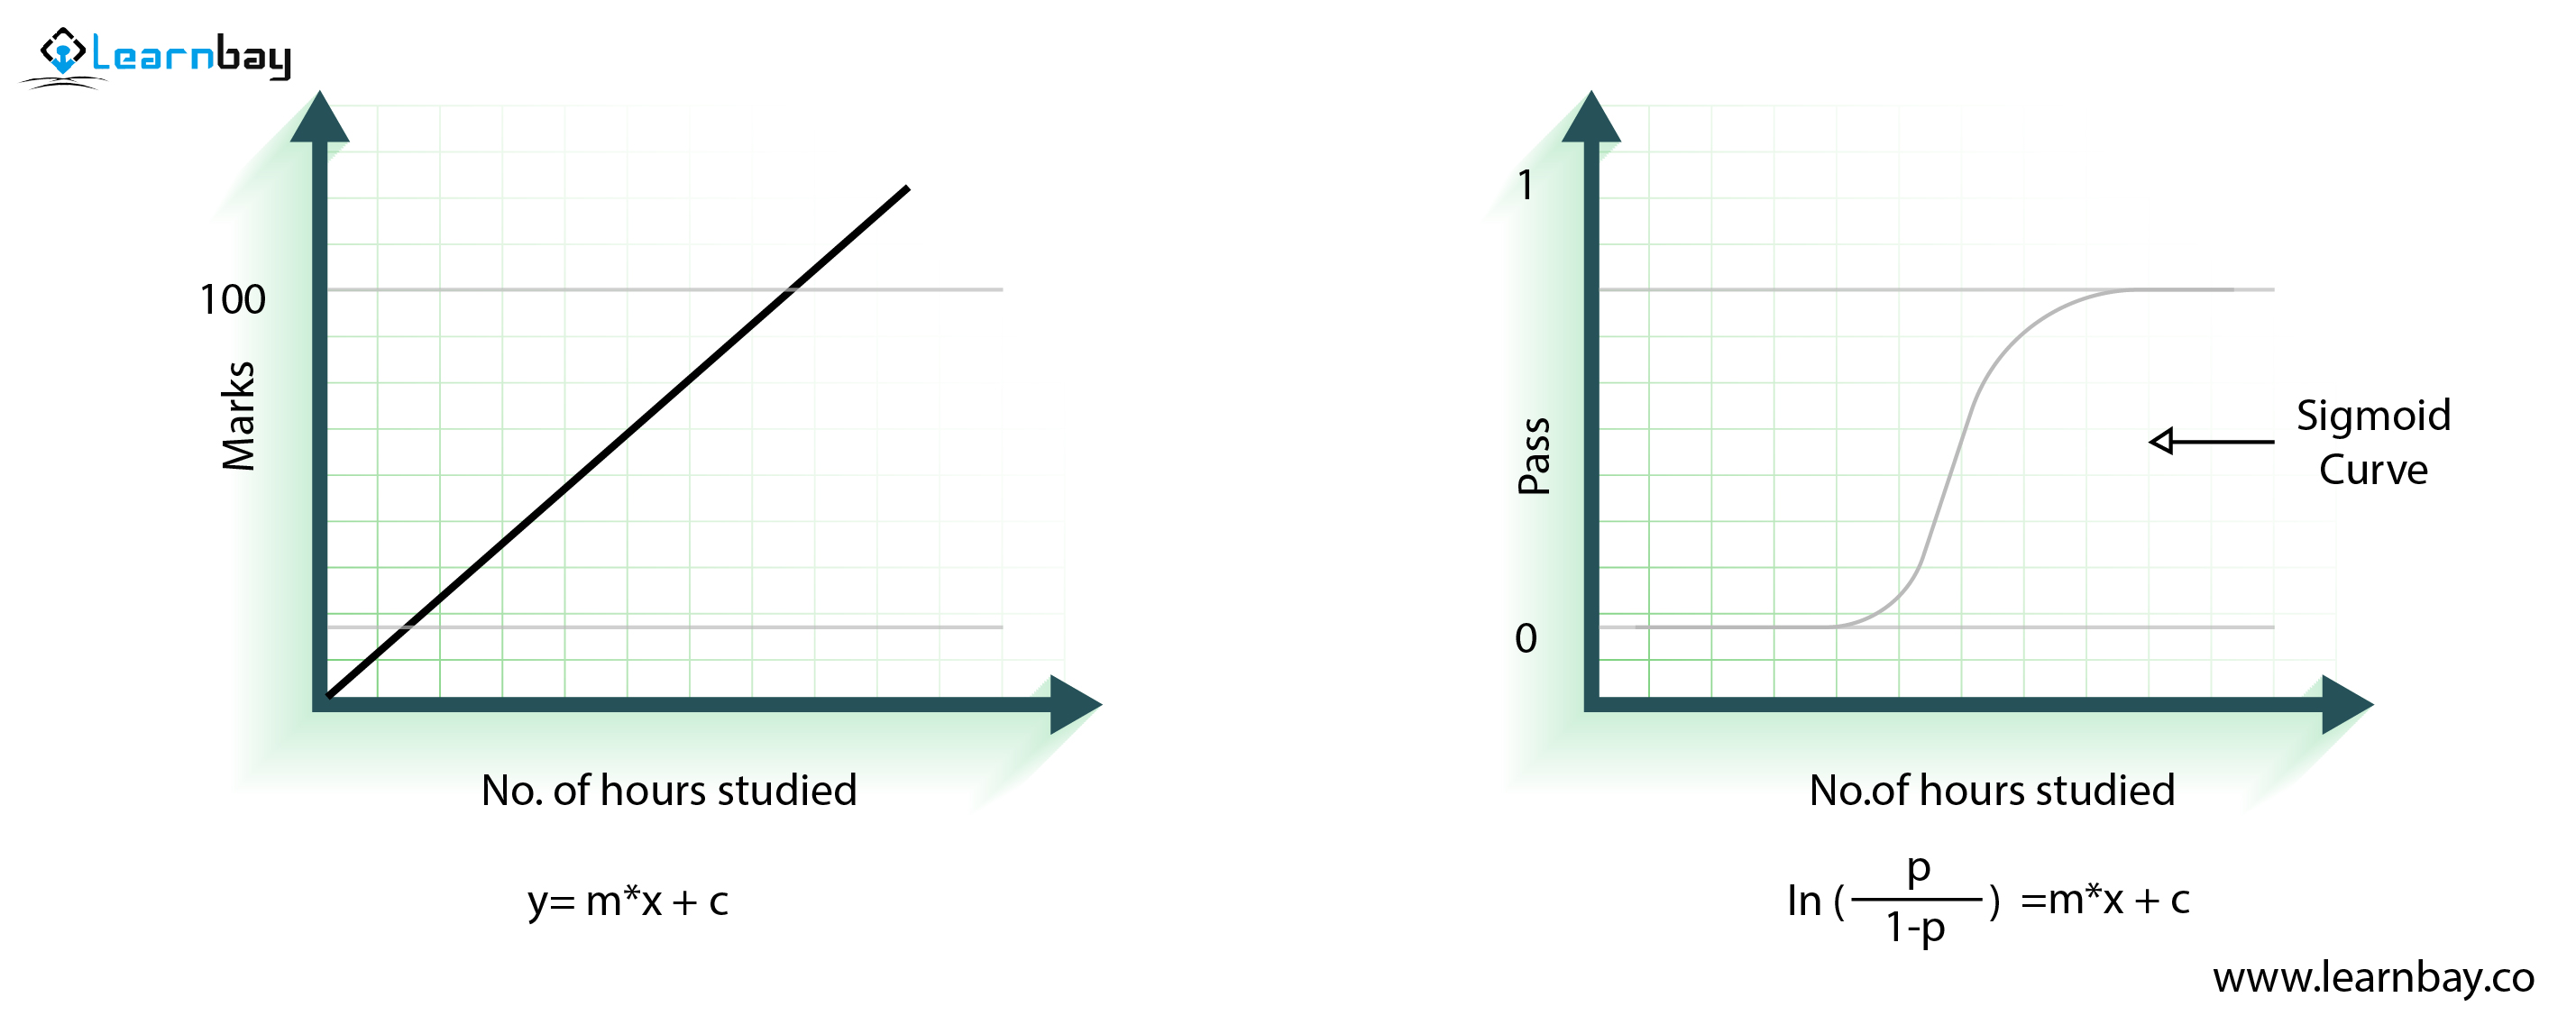 An illustration of a graph with two lines the first graph shows an straight line, while the second has a sigmoid curve.